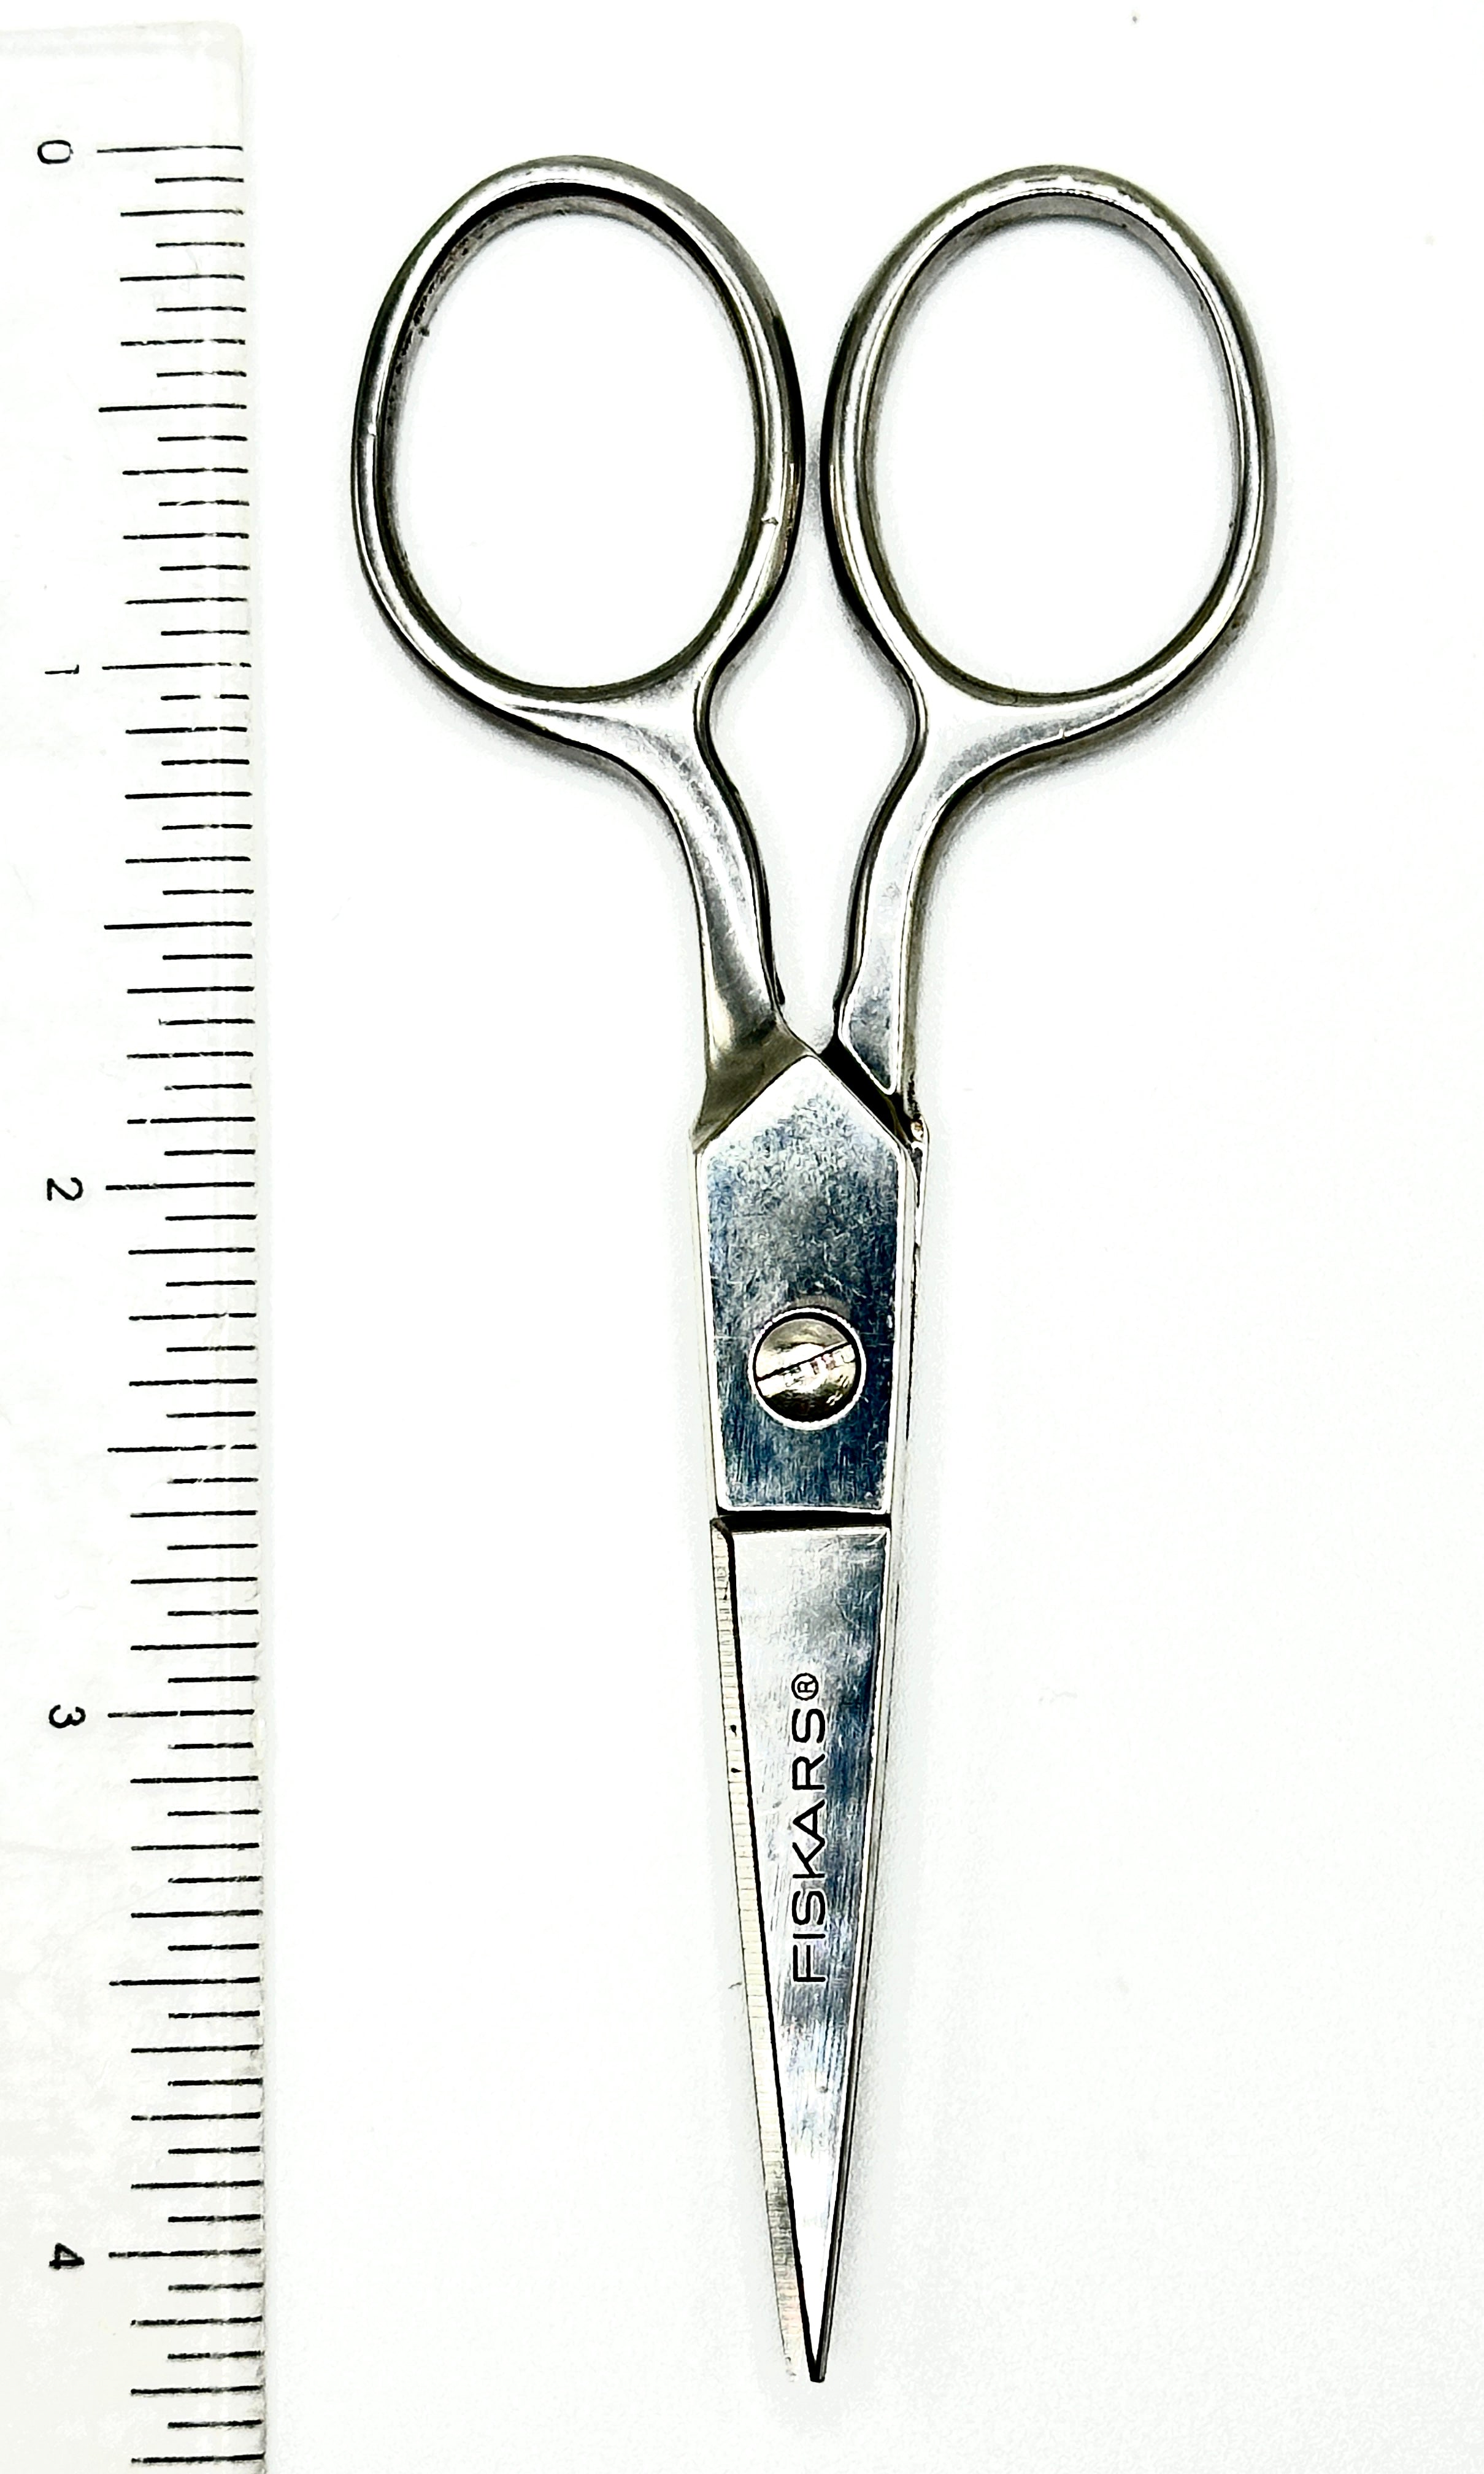 Mini Embroidery Scissors, 4 Colors Available. Small Vintage Scissors,  Durable Small Sewing Scissors. 